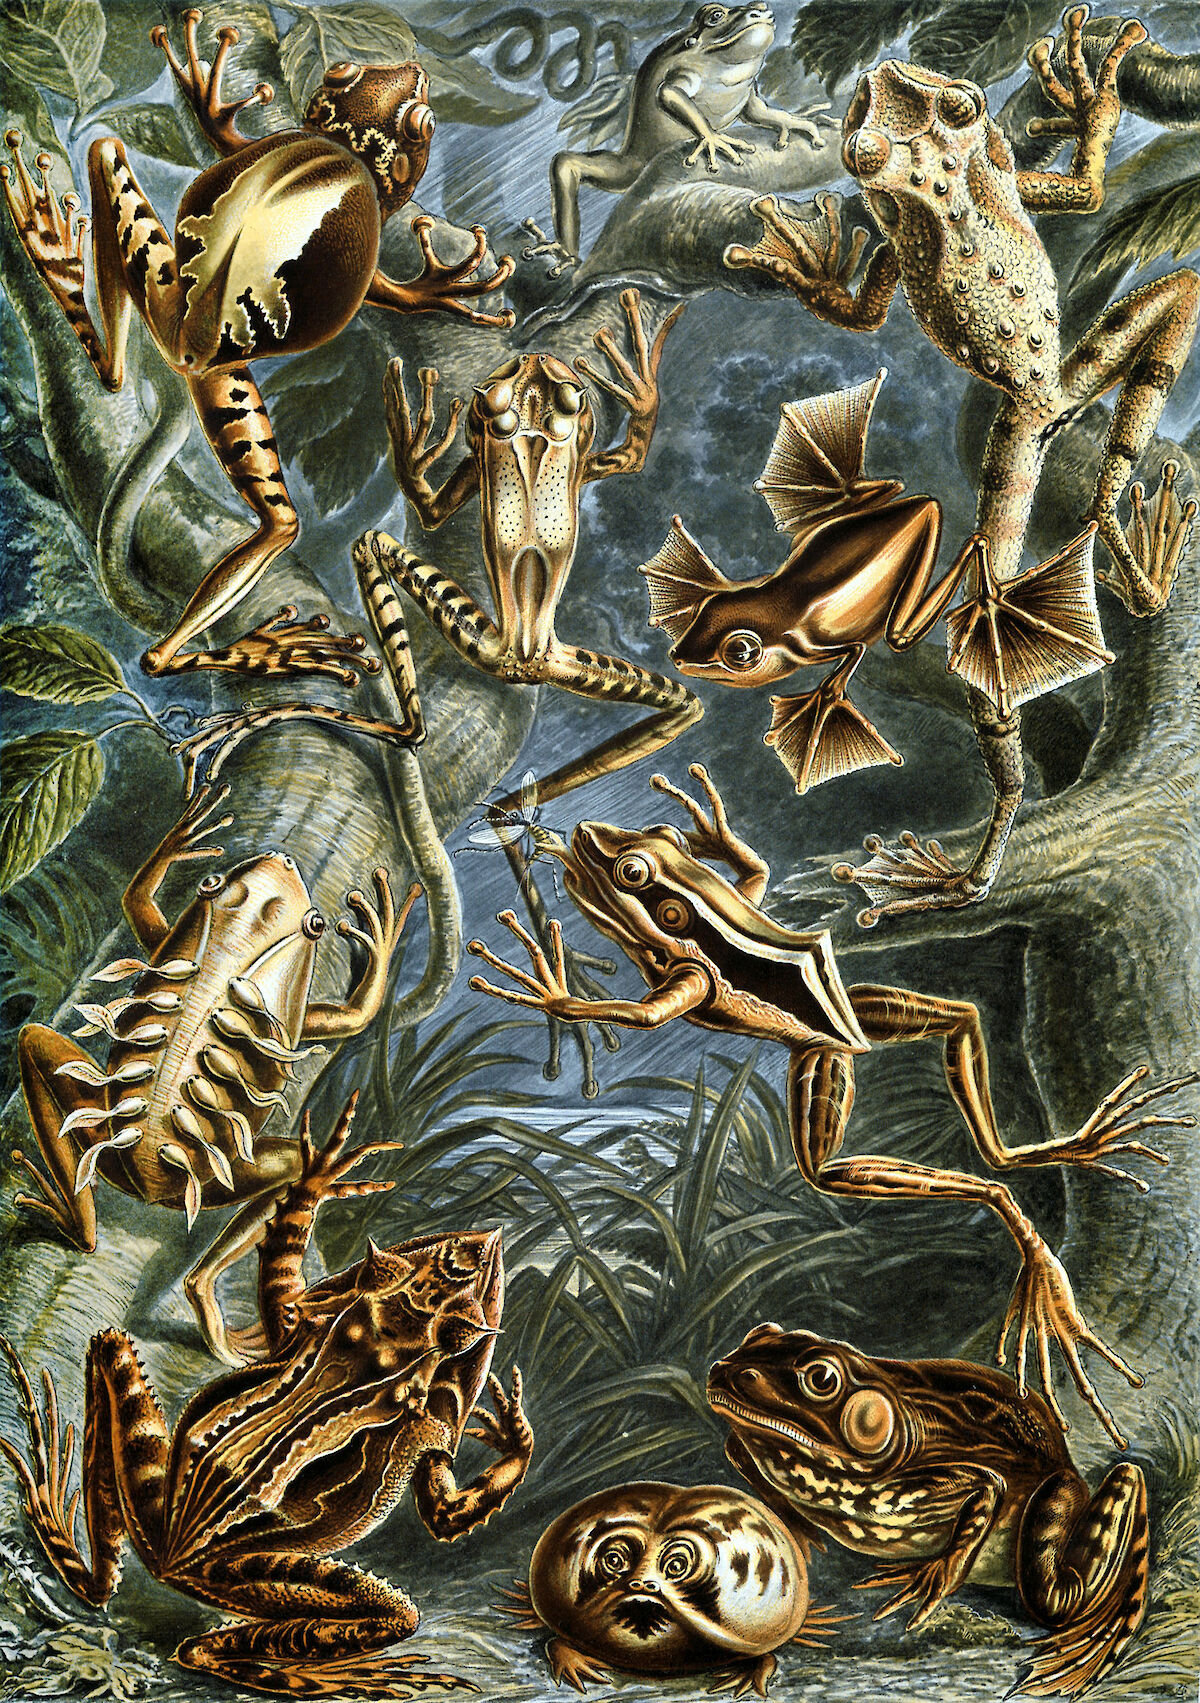 art-forms-in-nature-plate-68-batrachia-by-ernst-haeckel